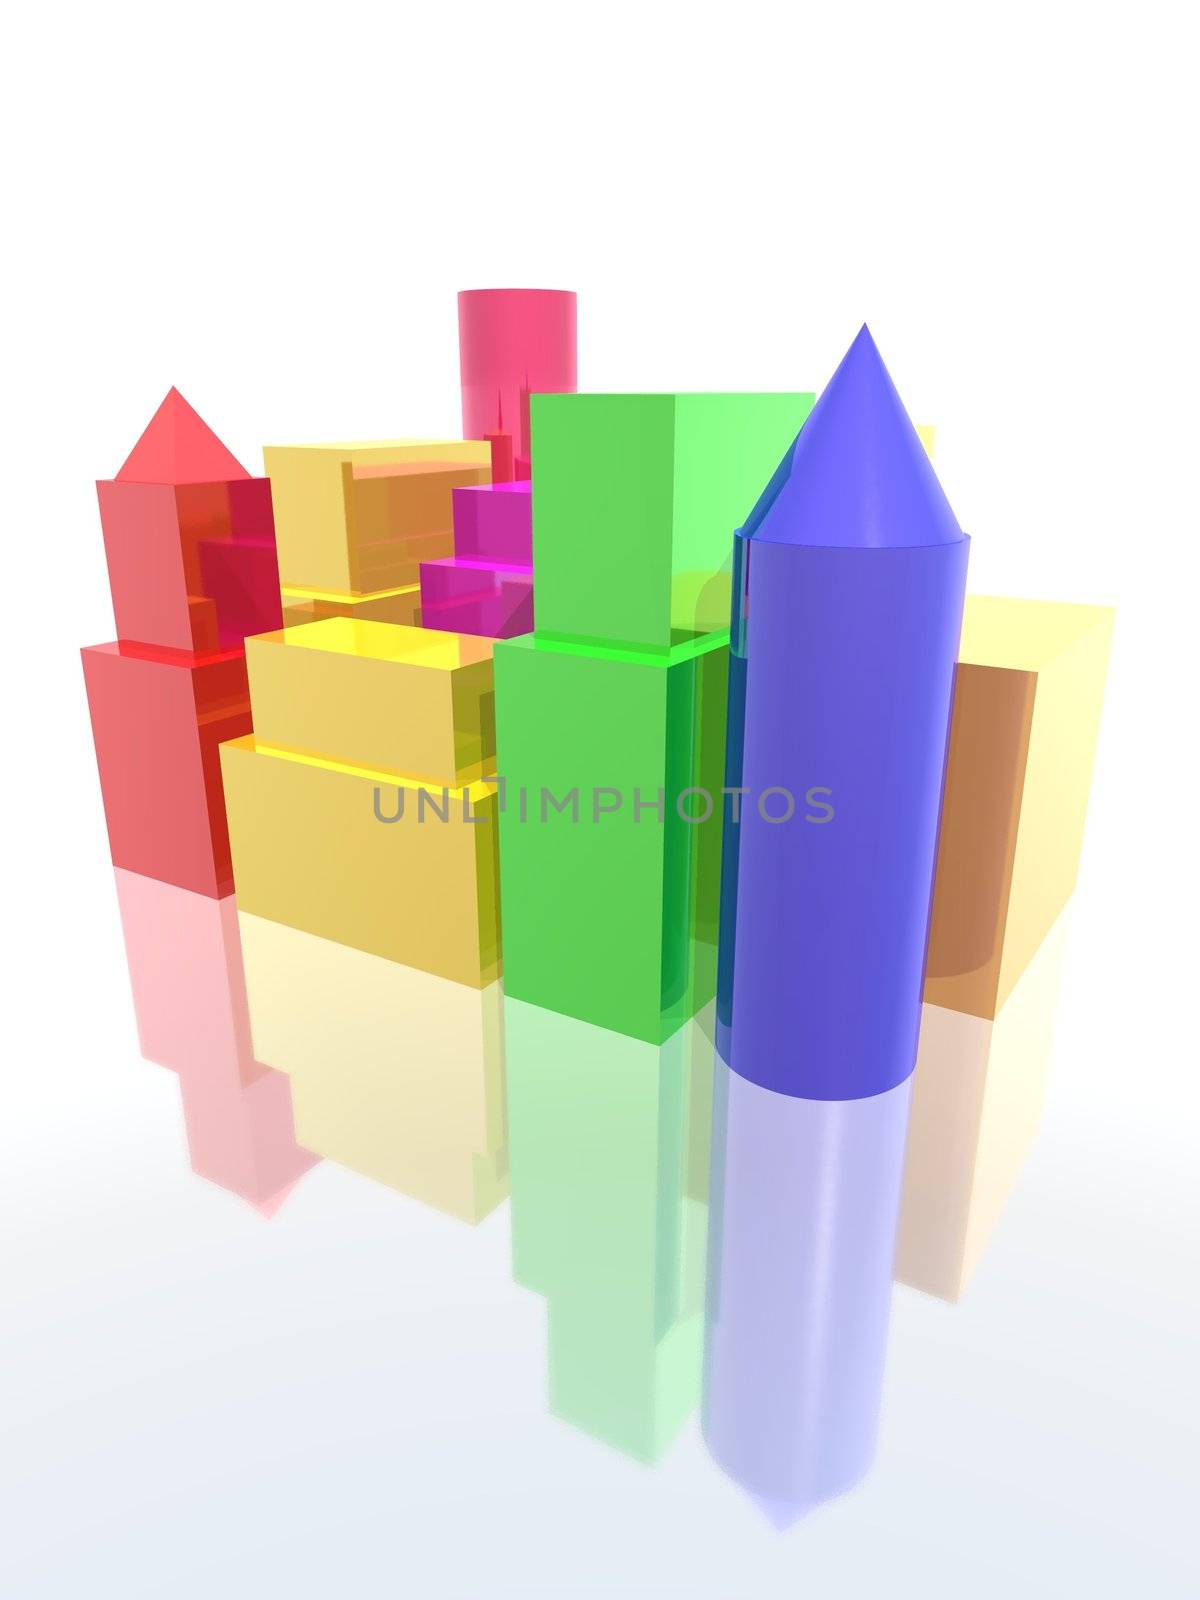 a 3d rendering of a city with colored buildings